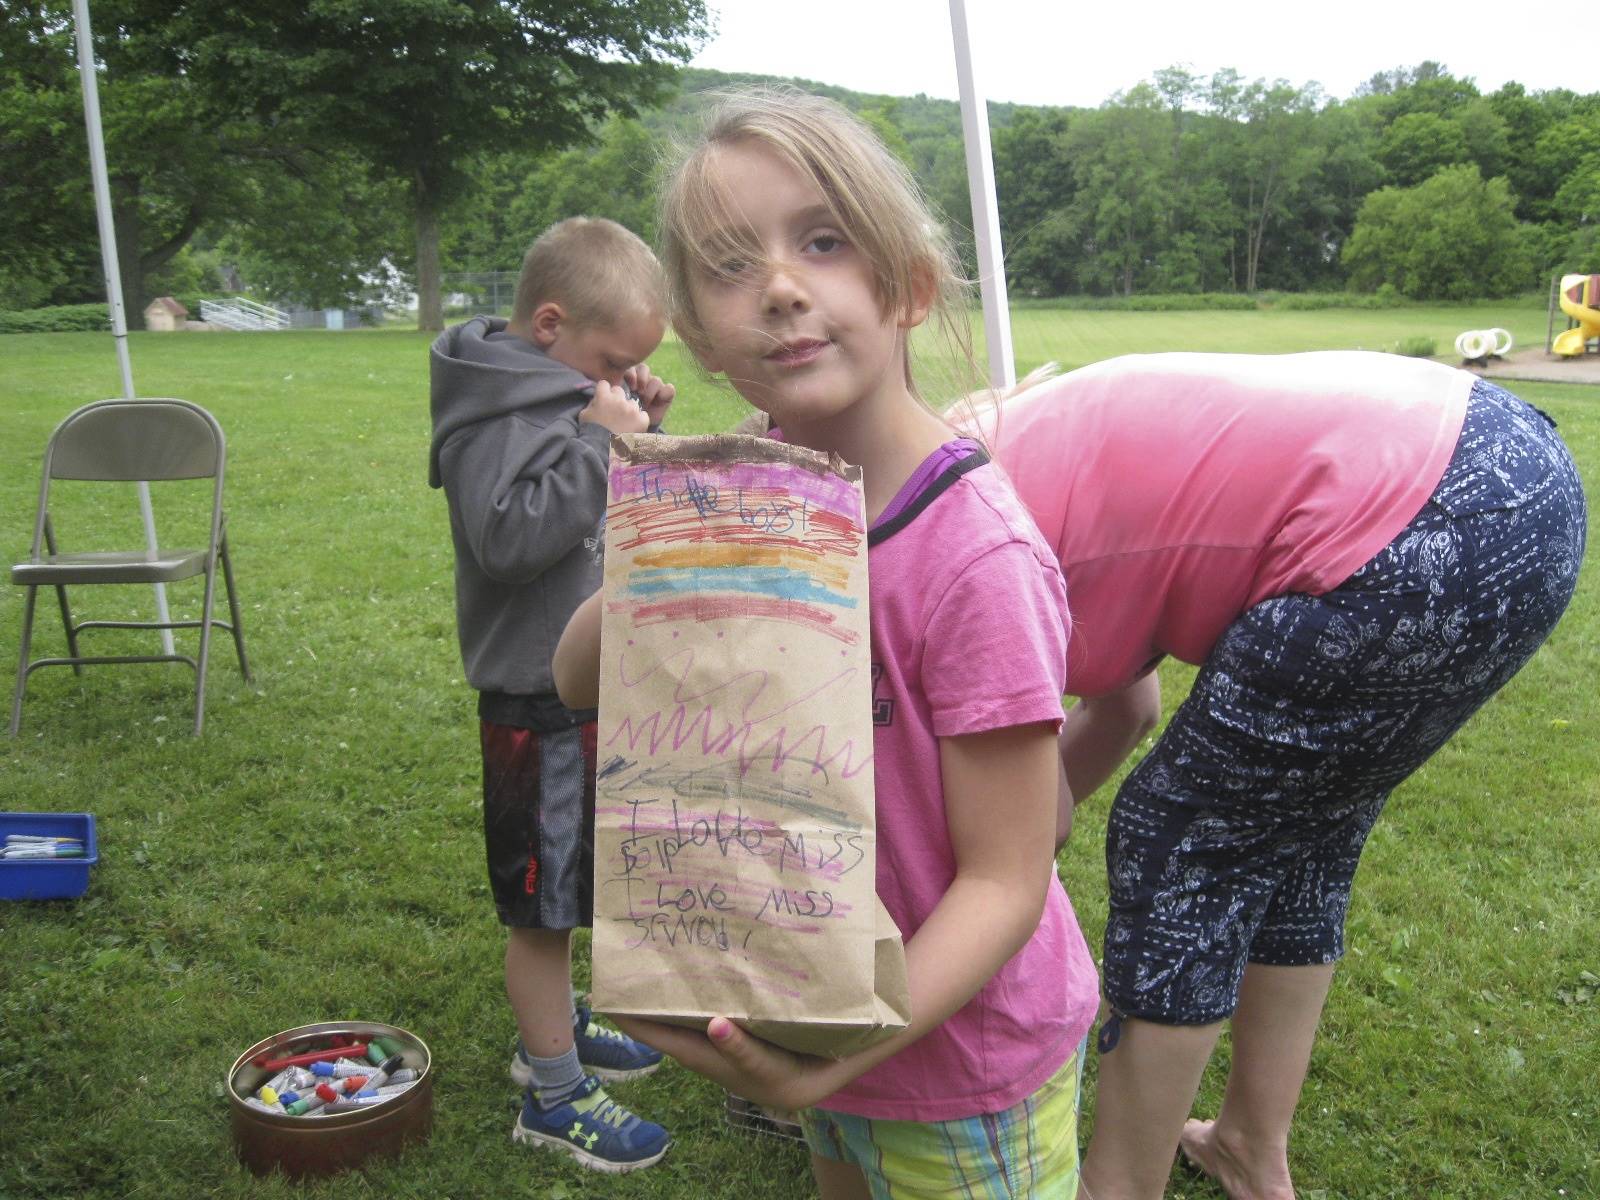 Student shows decorated bag to hold her campout treasures.